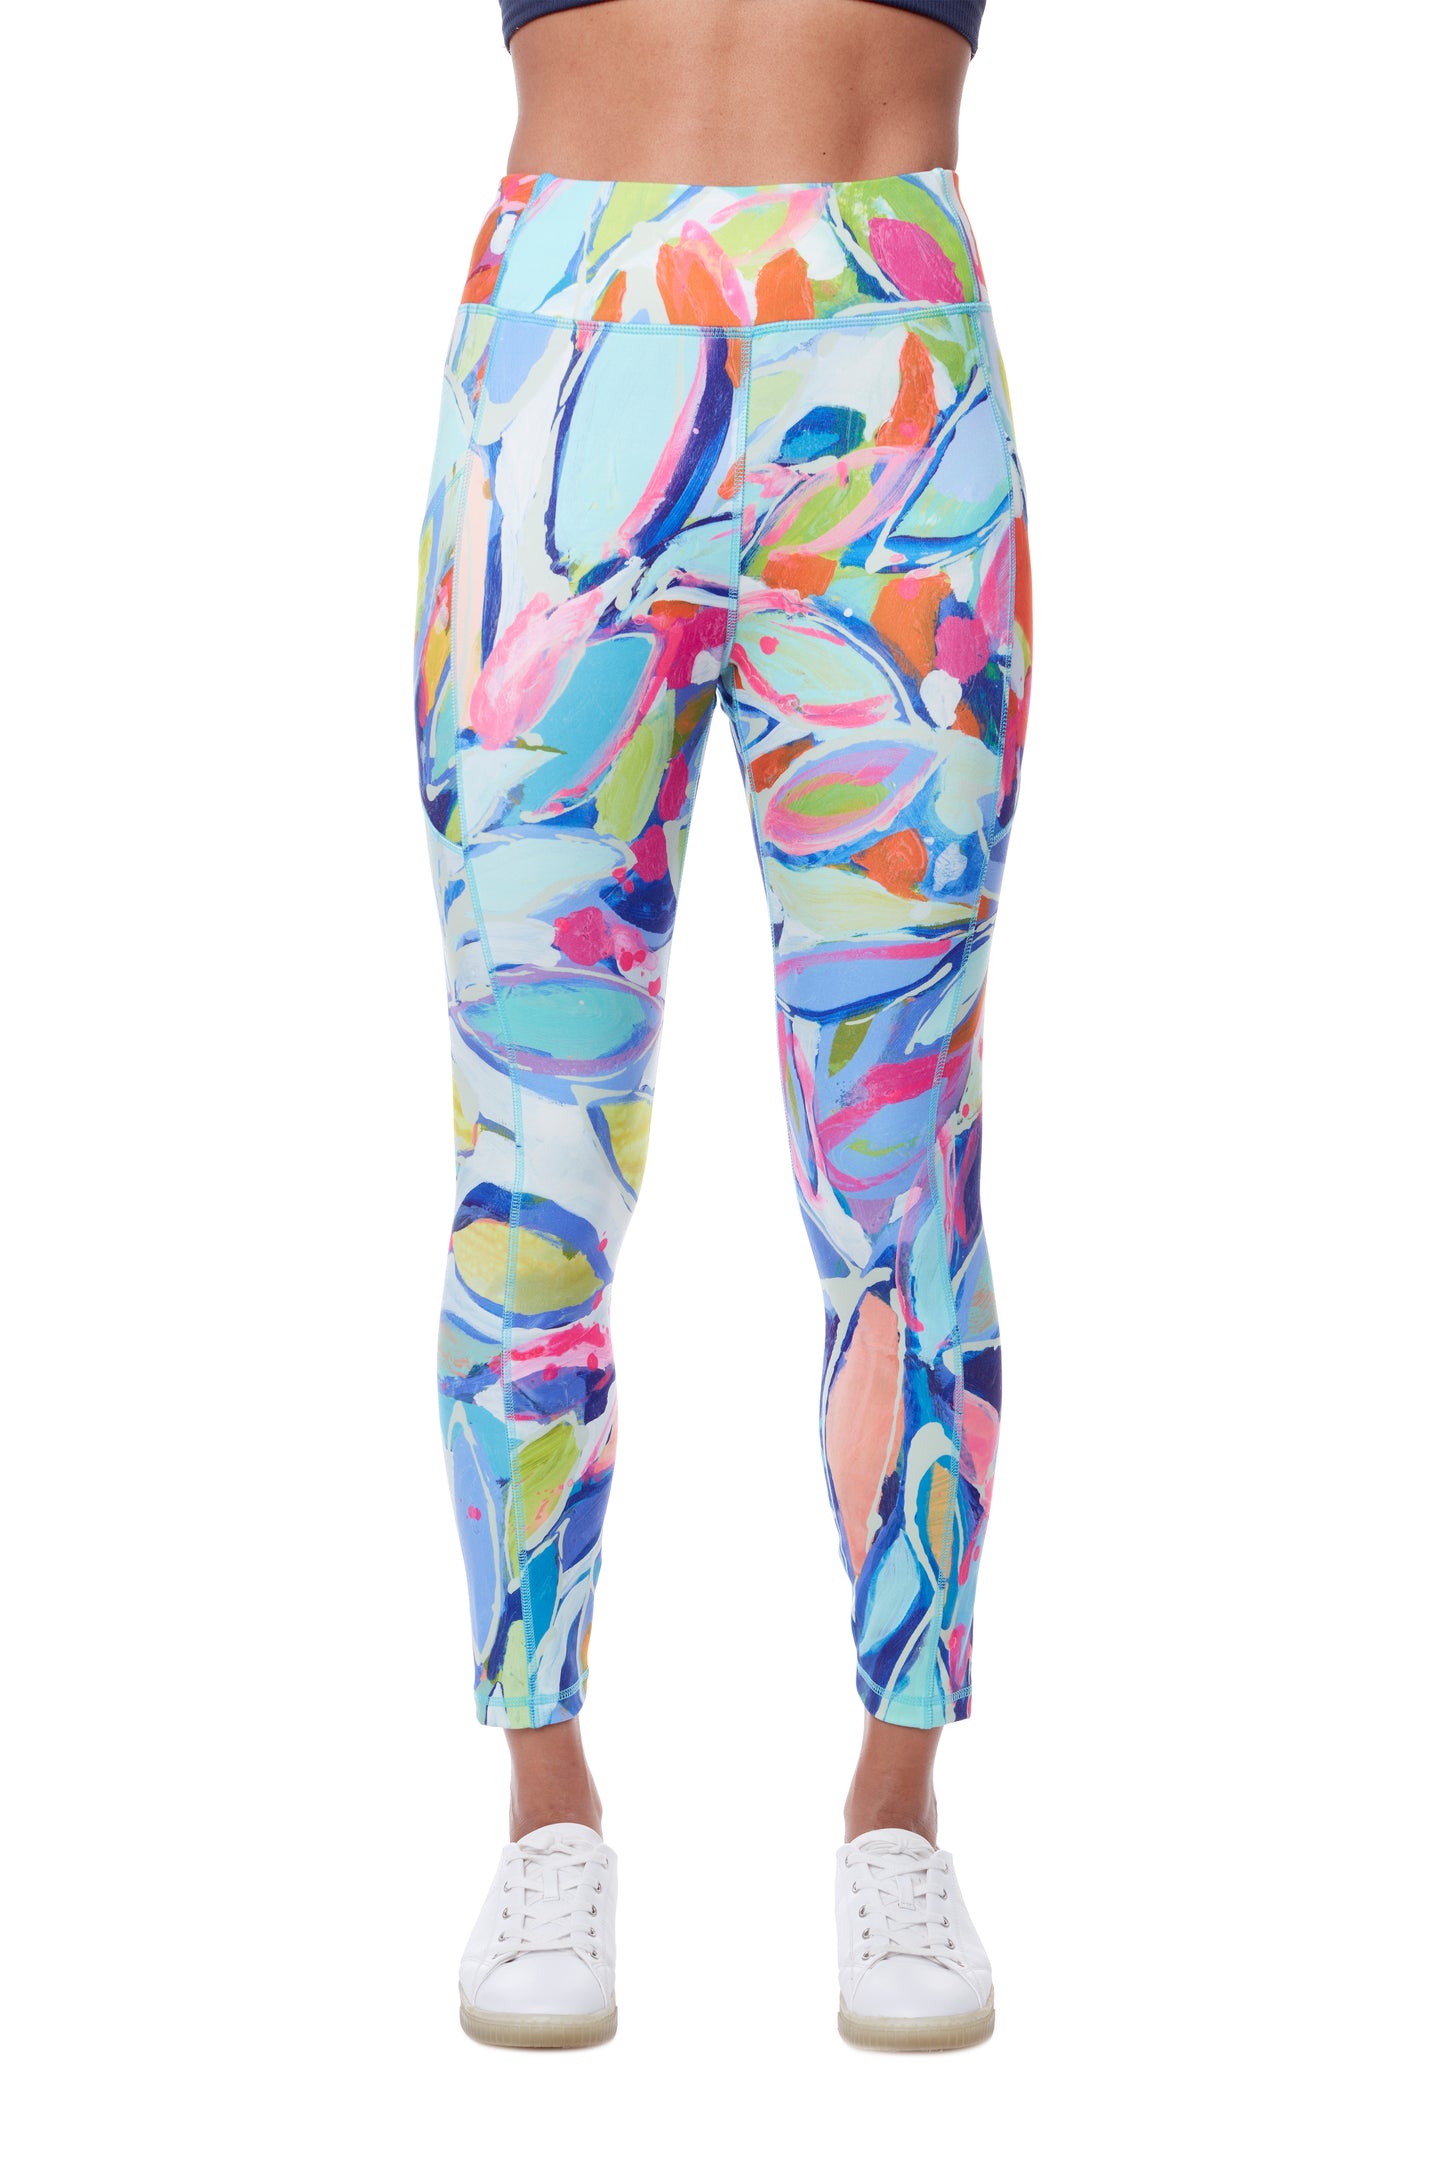 Party in August pull-on leggings